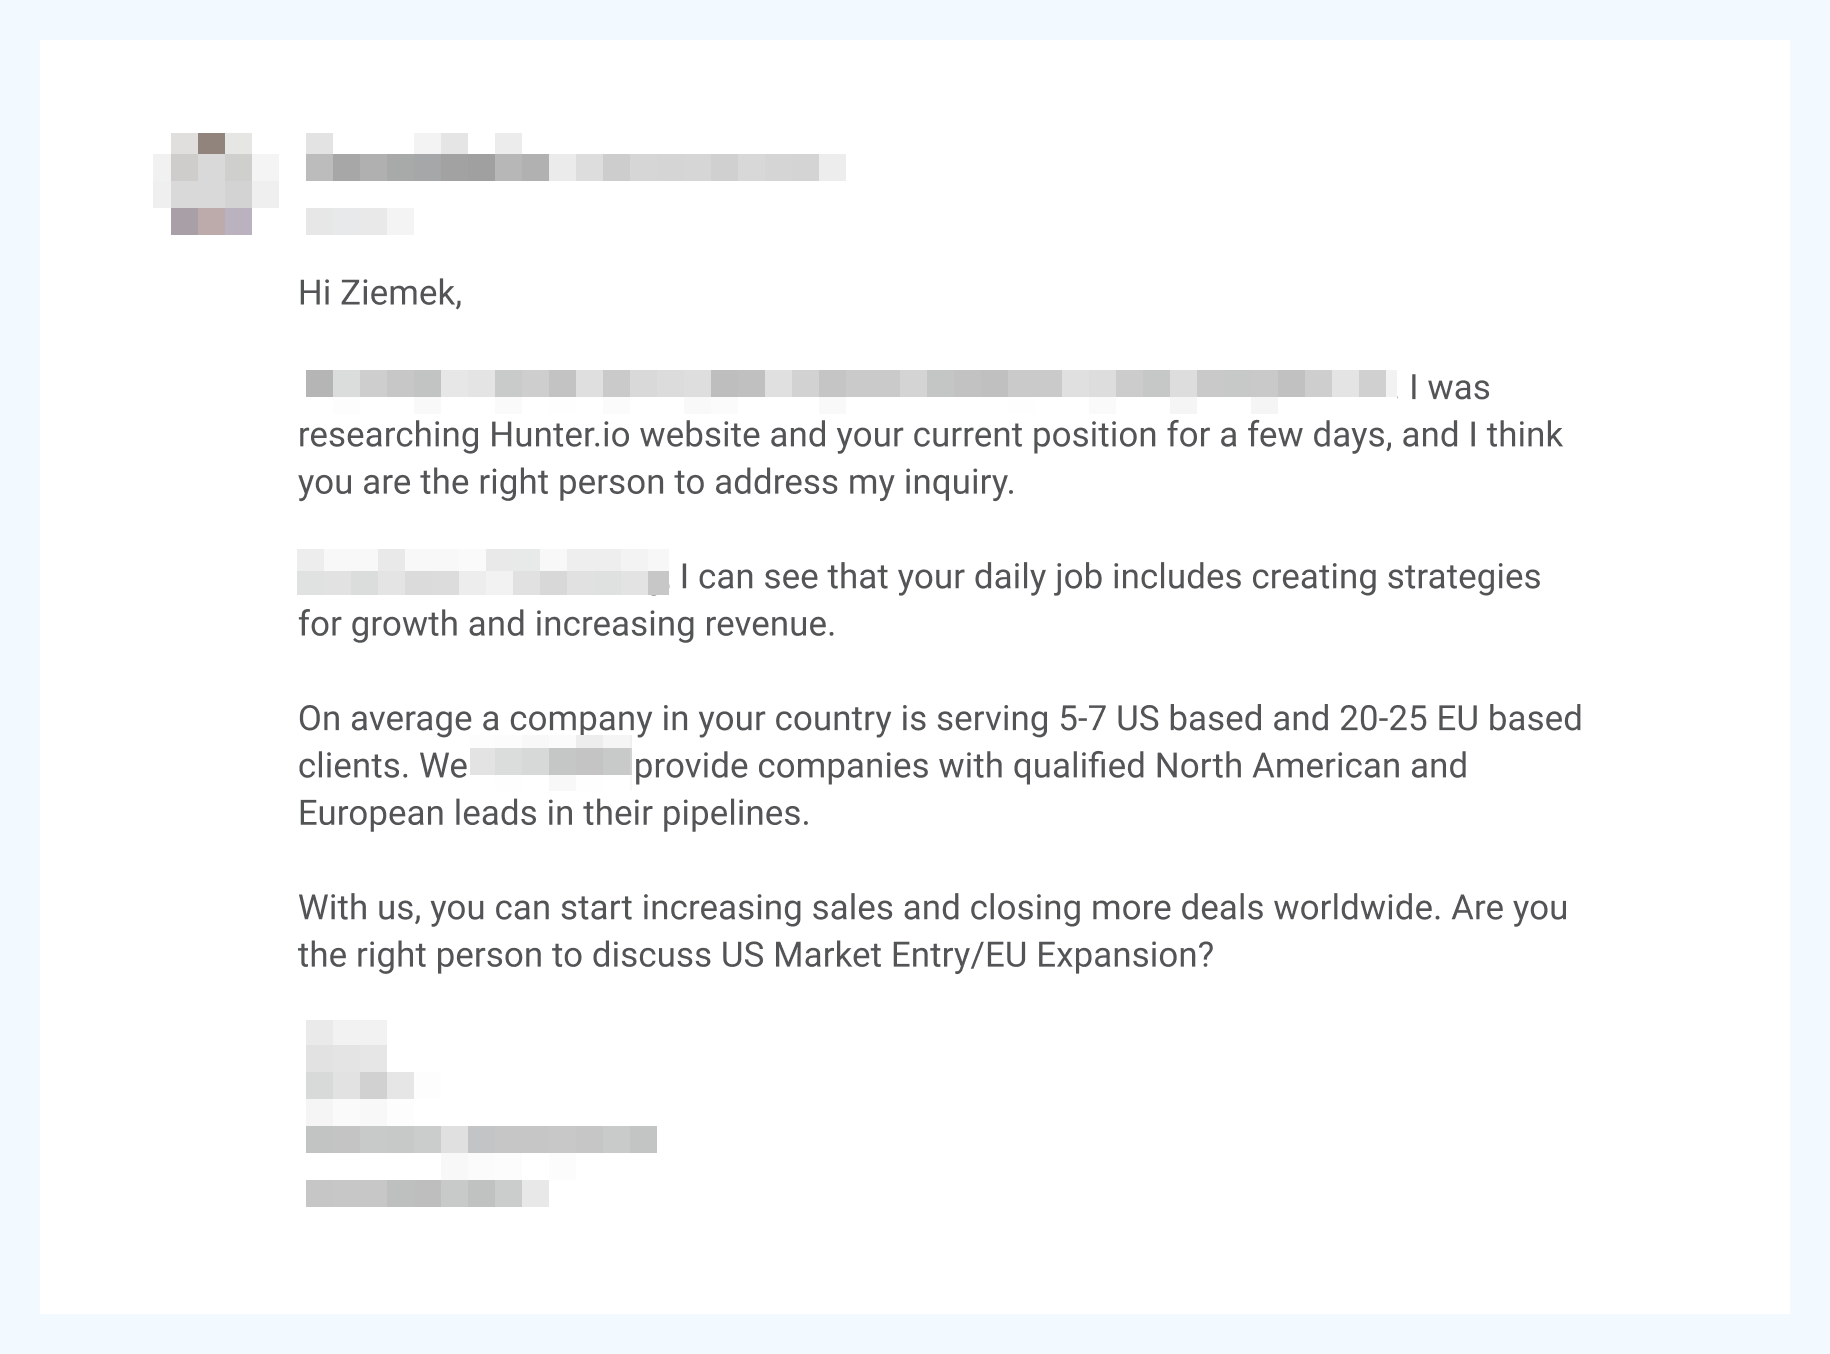 an example of poor AI personalization of a cold email